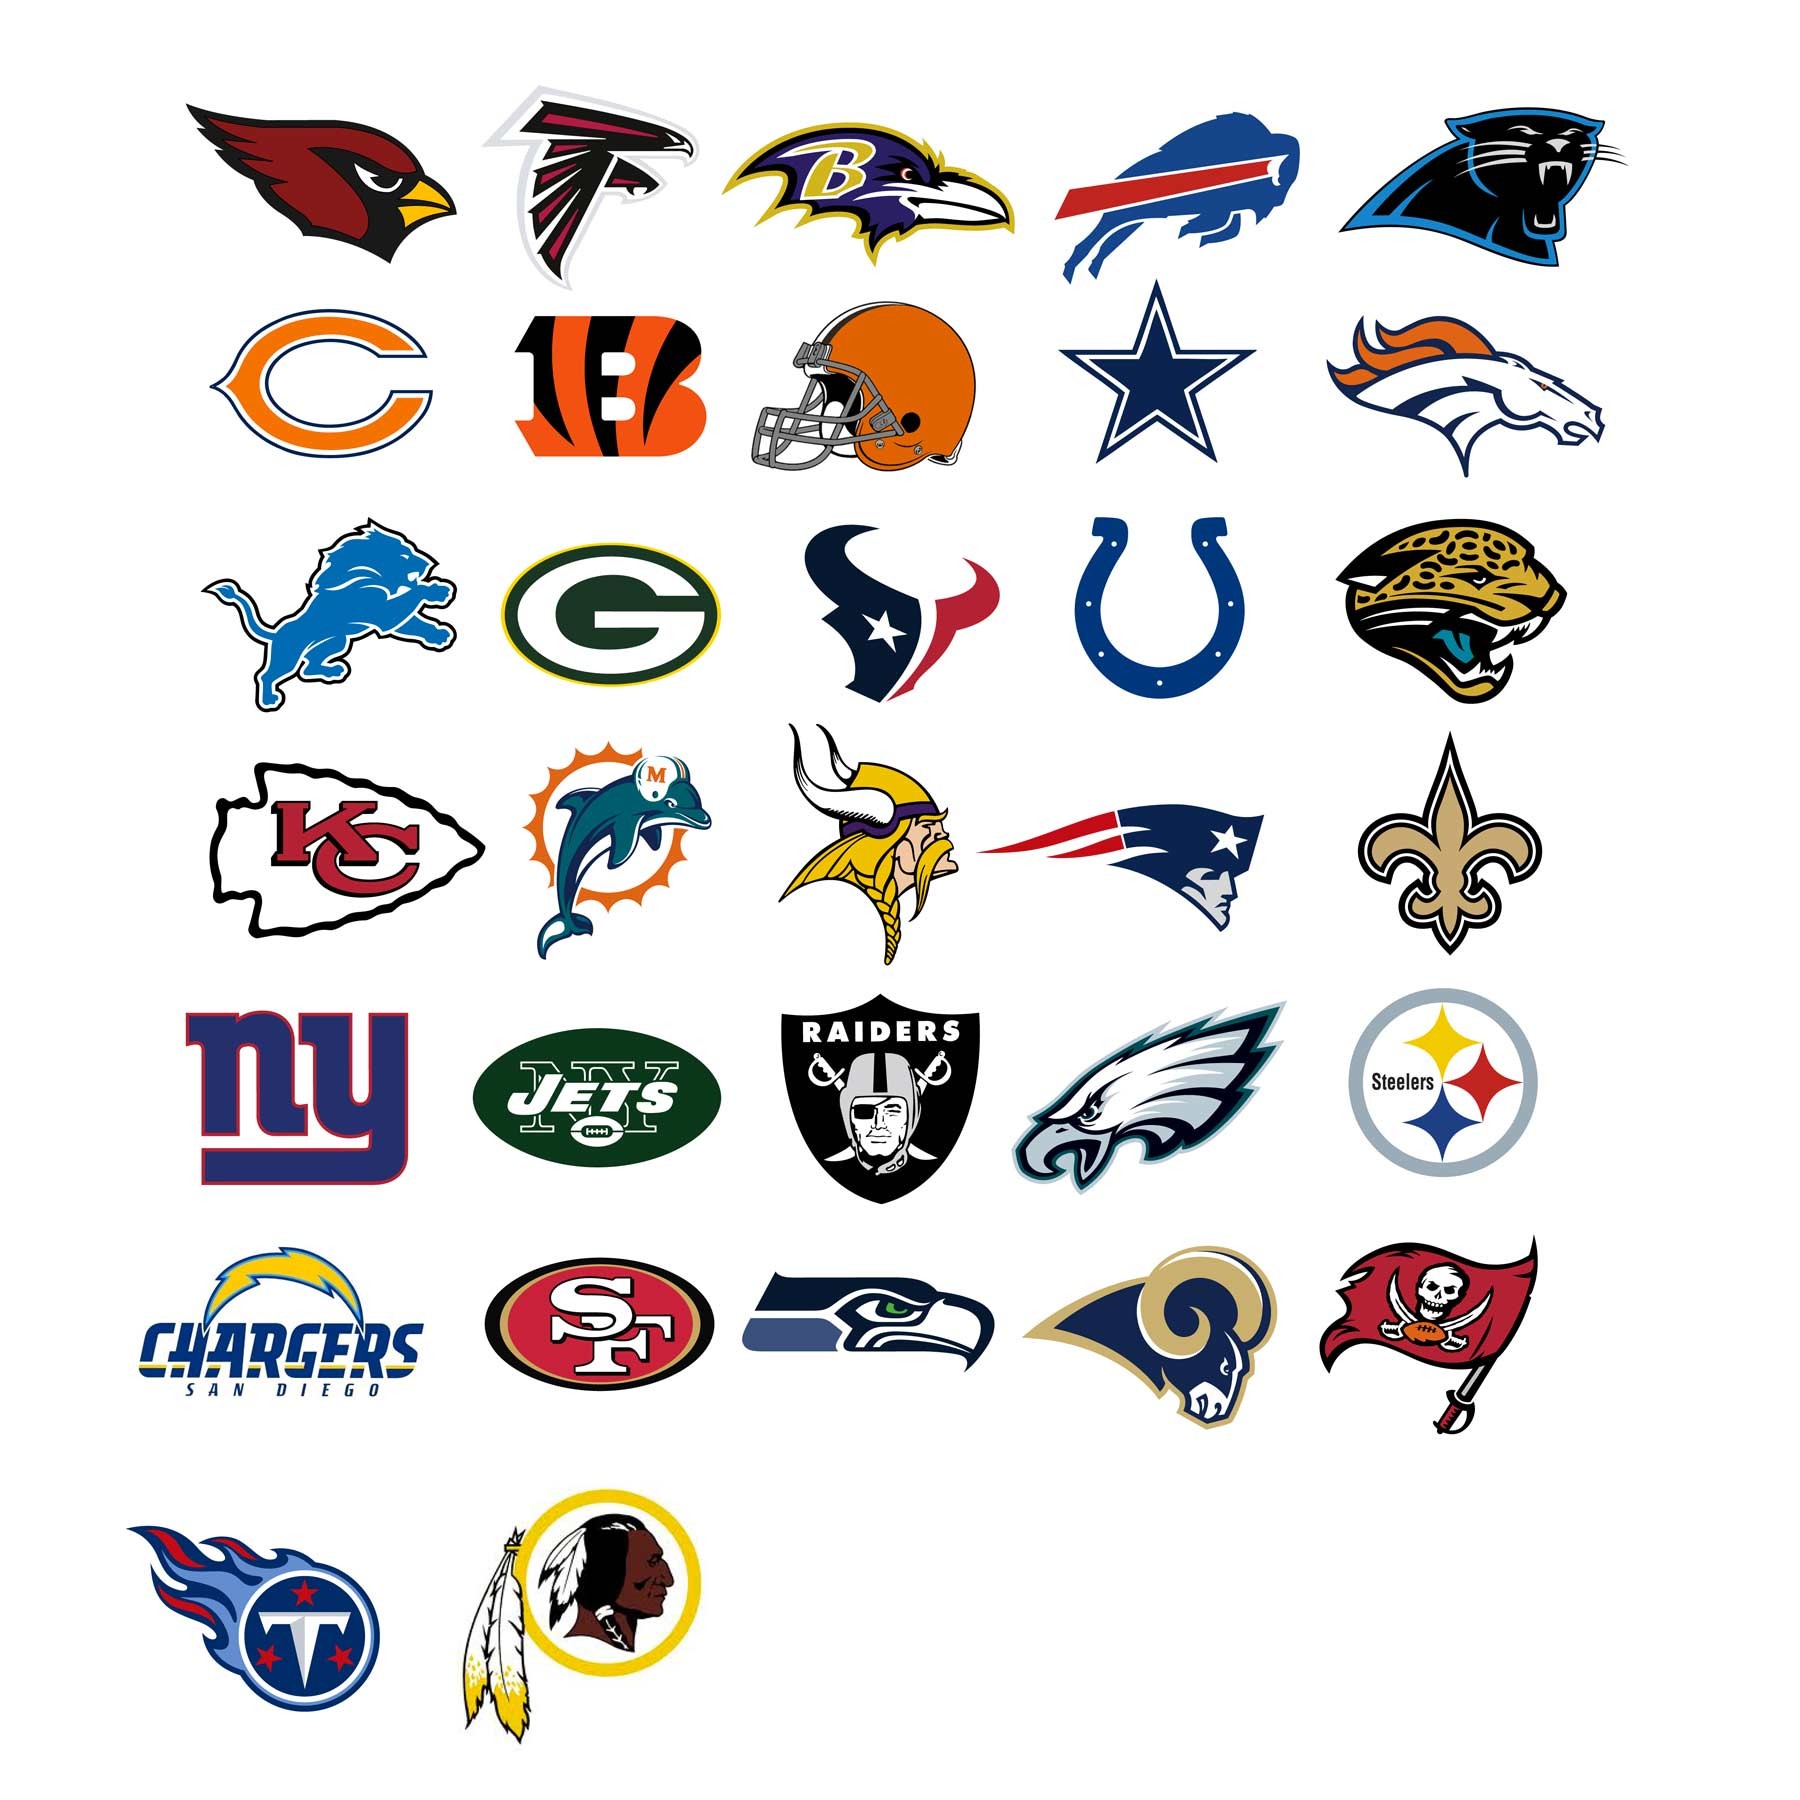 Nfl Team Logos Clipart #1. To